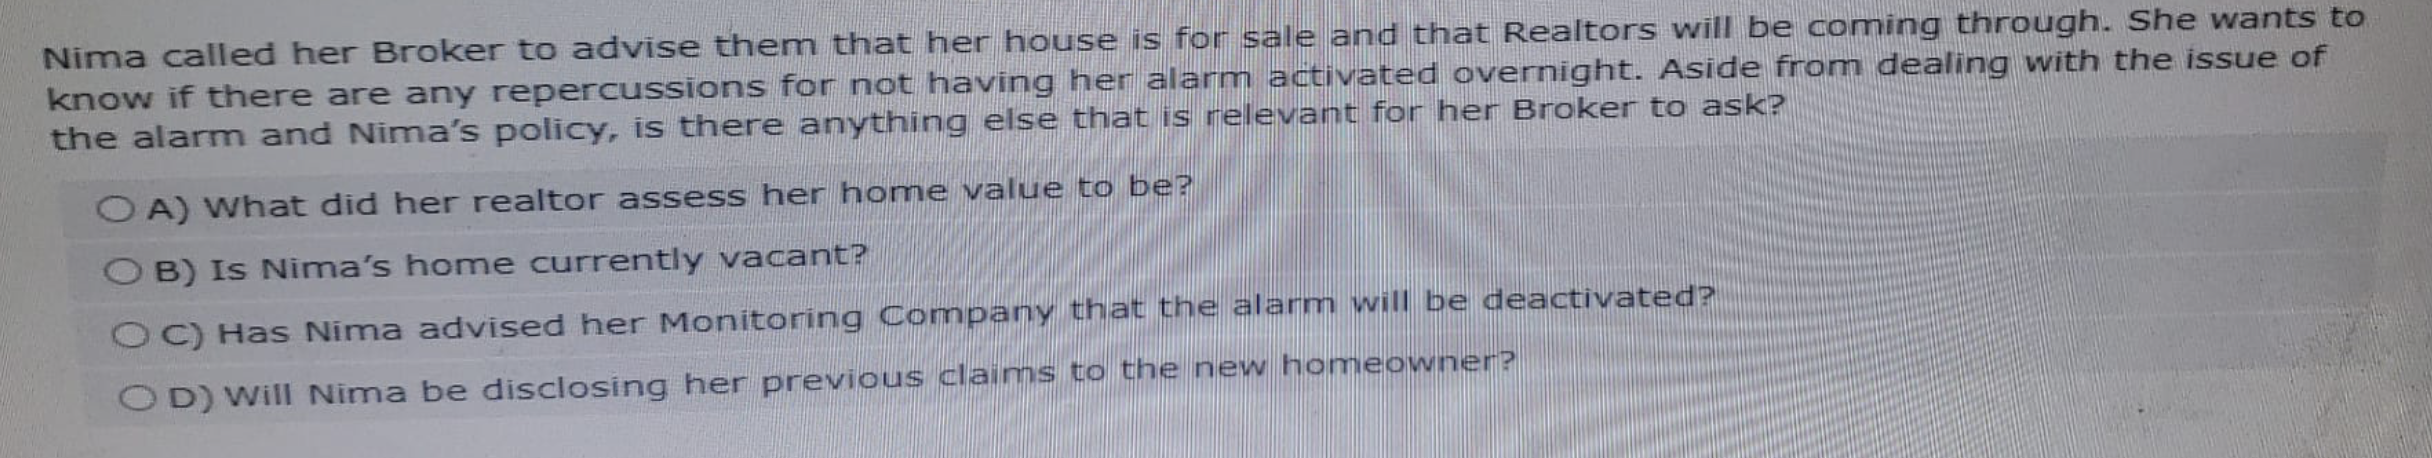 Nima called her Broker to advise them that her house is for sale and that Realtors will be coming through. She wants to
know if there are any repercussions for not having her alarm activated overnight. Aside from dealing with the issue of
the alarm and Nima's policy, is there anything else that is relevant for her Broker to ask?
OA) What did her realtor assess her home value to be?
OB) Is Nima's home currently vacant?
OC) Has Nima advised her Monitoring Company that the alarm will be deactivated?
OD) Will Nima be disclosing her previous claims to the new homeowner?